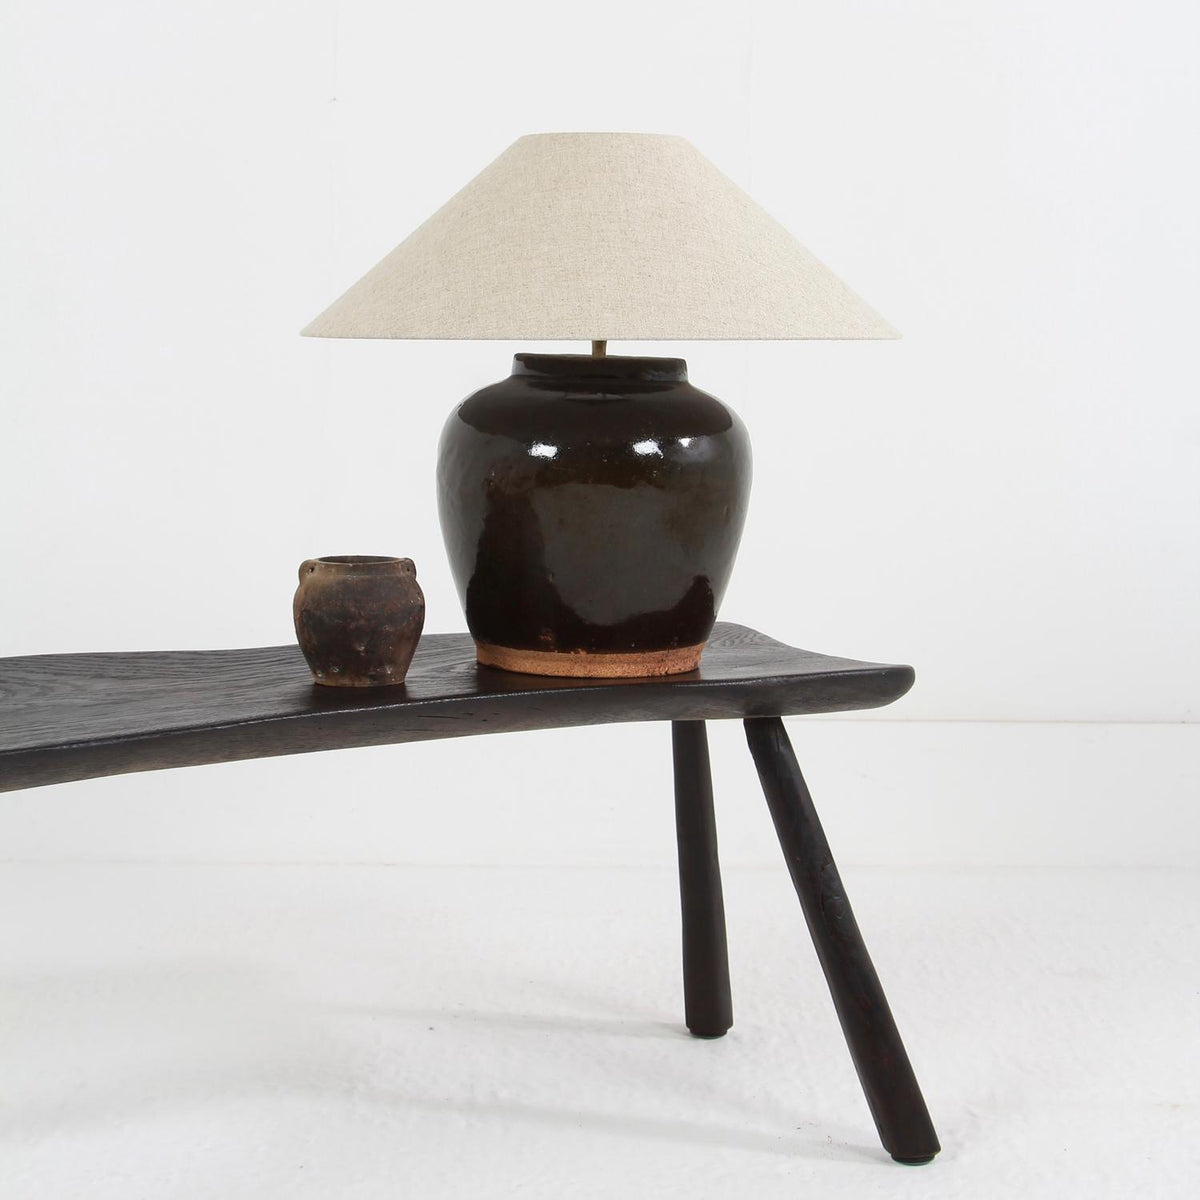 AUTHENTIC CHINESE BLACK GLAZED  TABLE LAMP WITH NATURAL BELGIUM LINEN SHADE